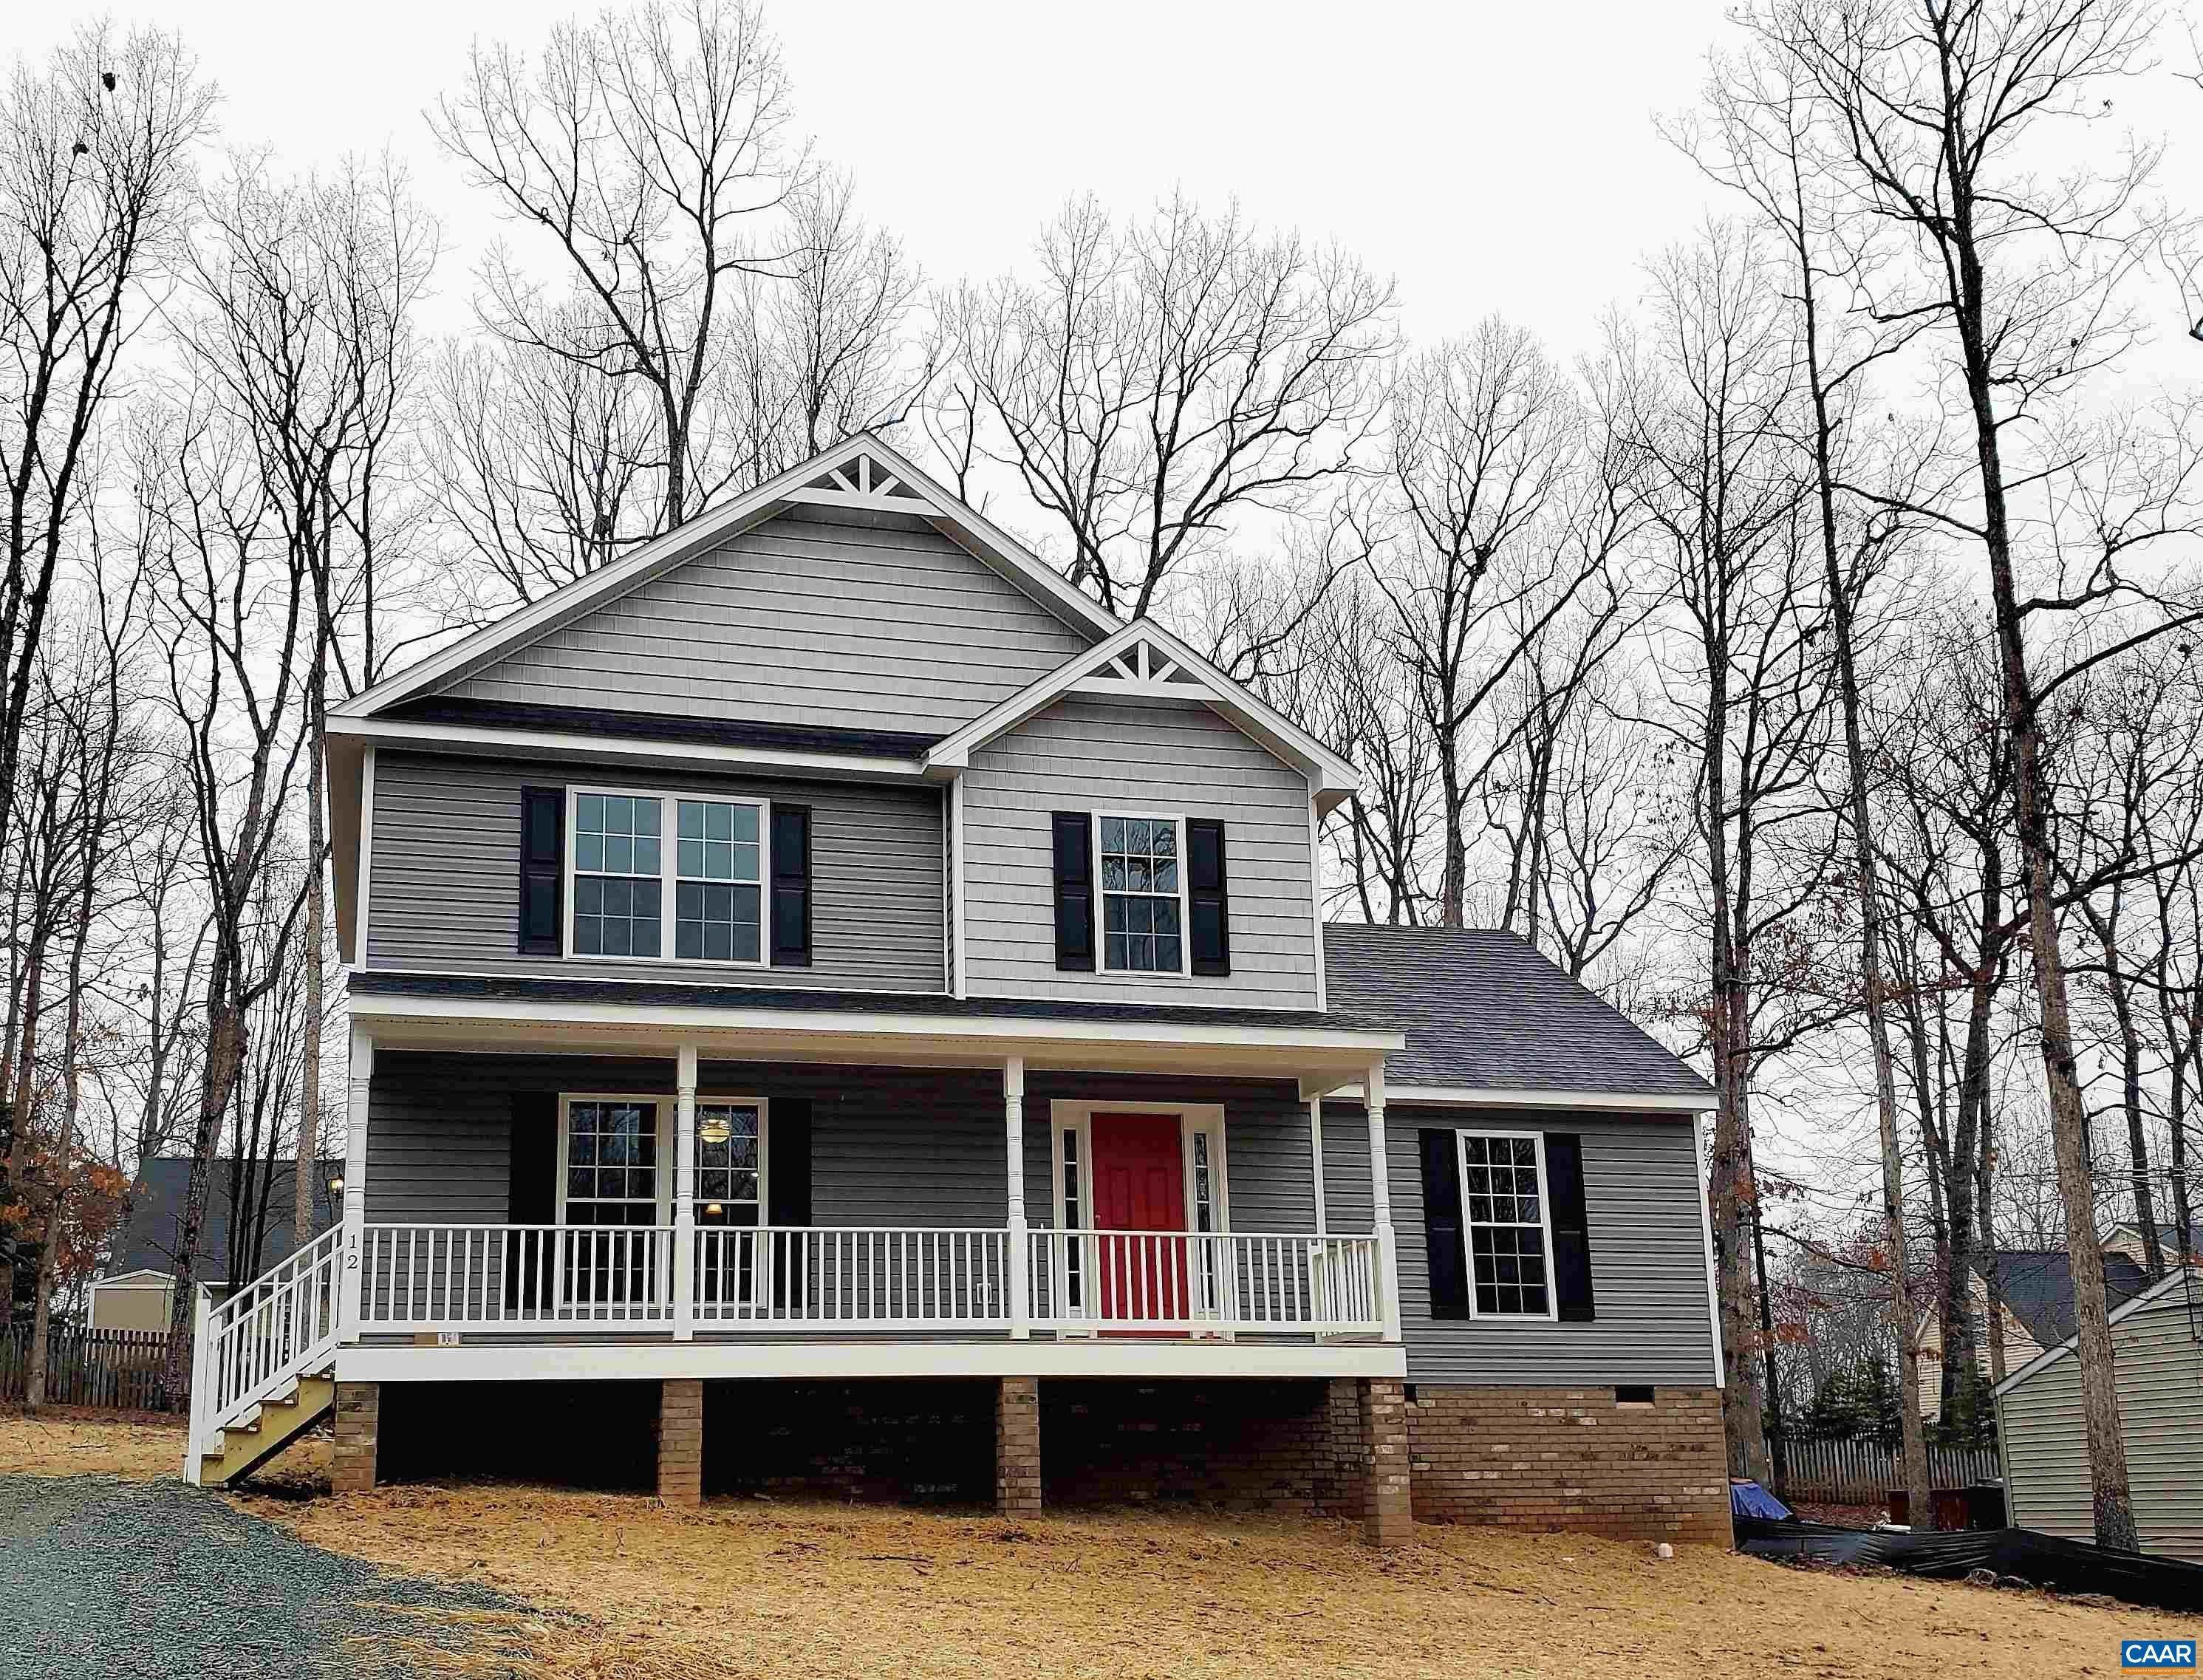 2. Single Family Homes for Sale at MARTIN VILLAGE RD #MV 15 Louisa, Virginia 23093 United States